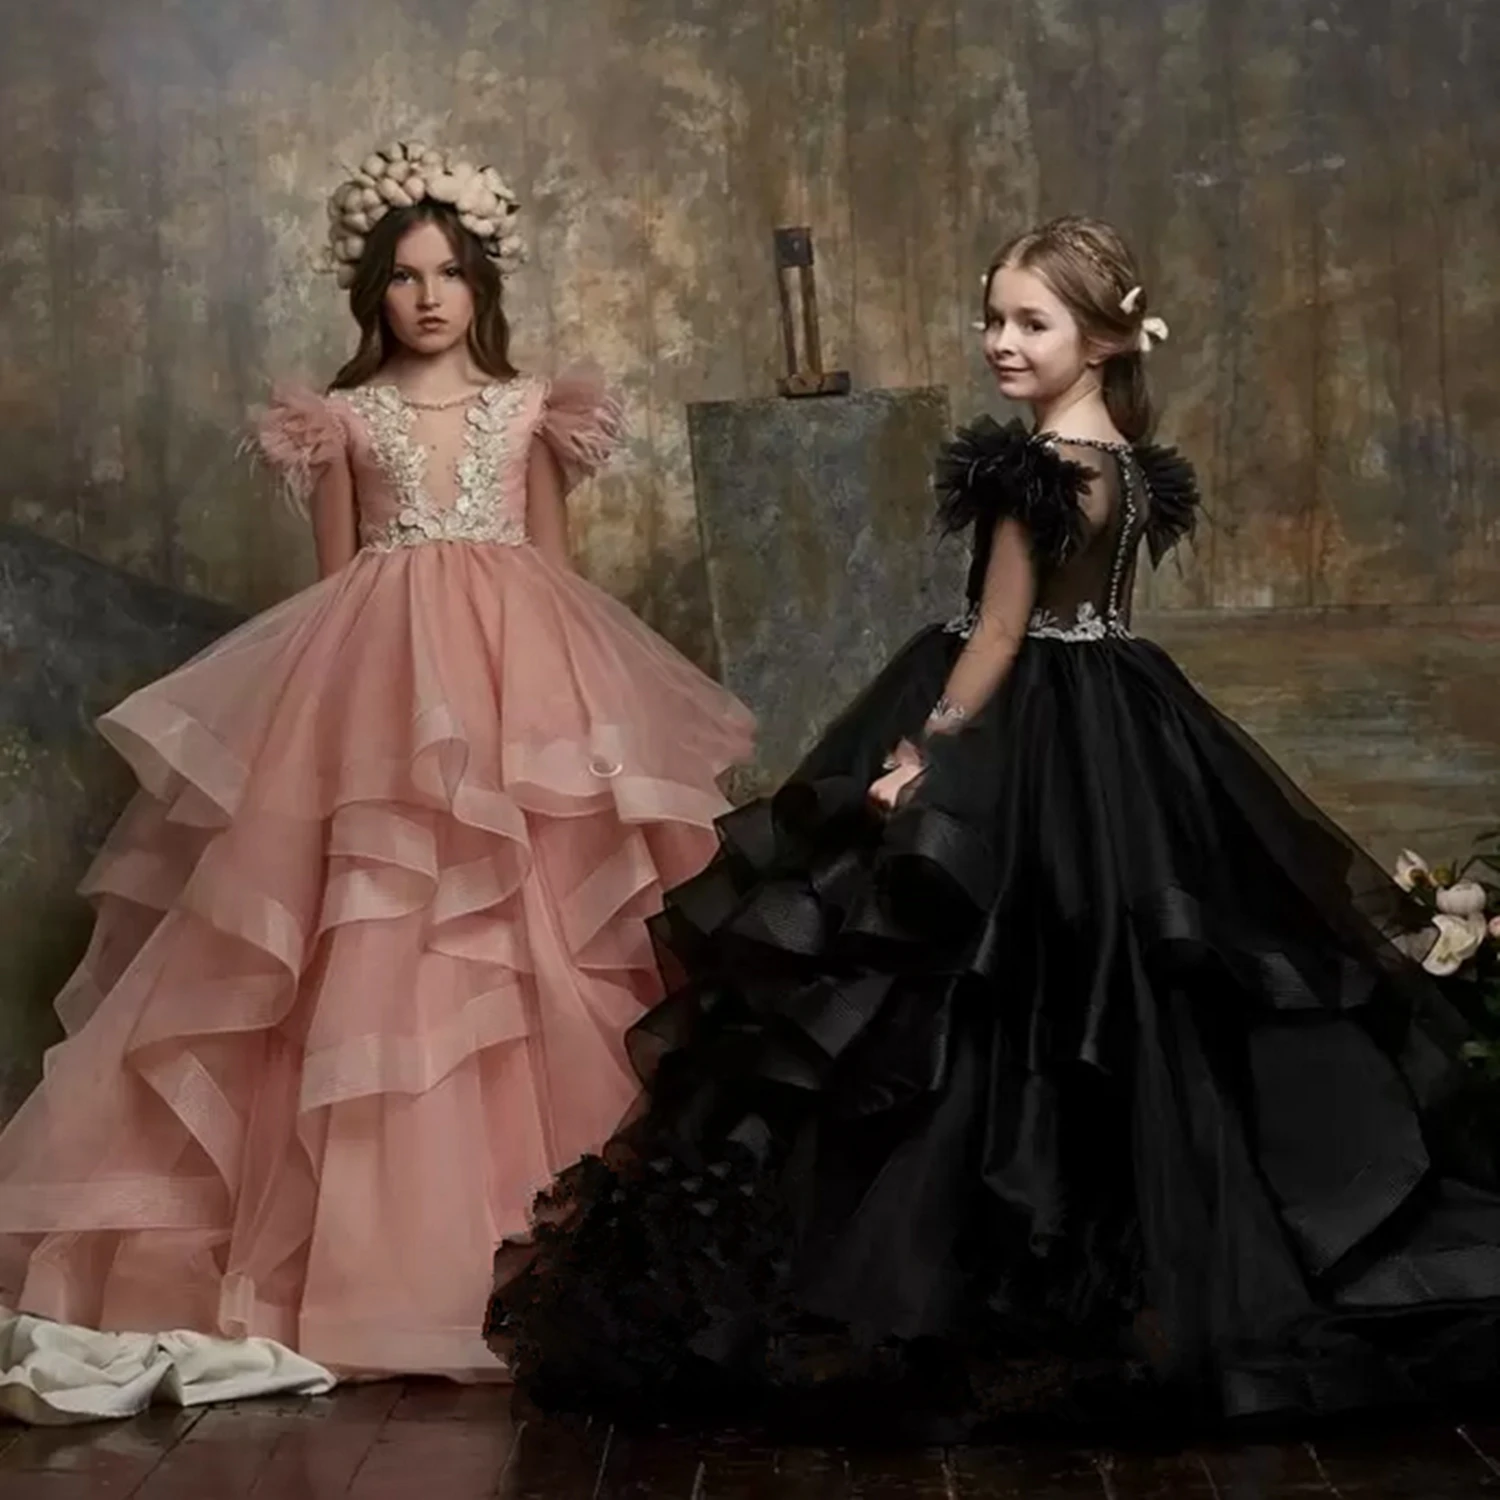 

Long Sleeves Flower Girl Dresses For Wedding Sheer Bateau Neck Appliqued Toddler Pageant Gowns Tulle Ball Gown Kids Prom